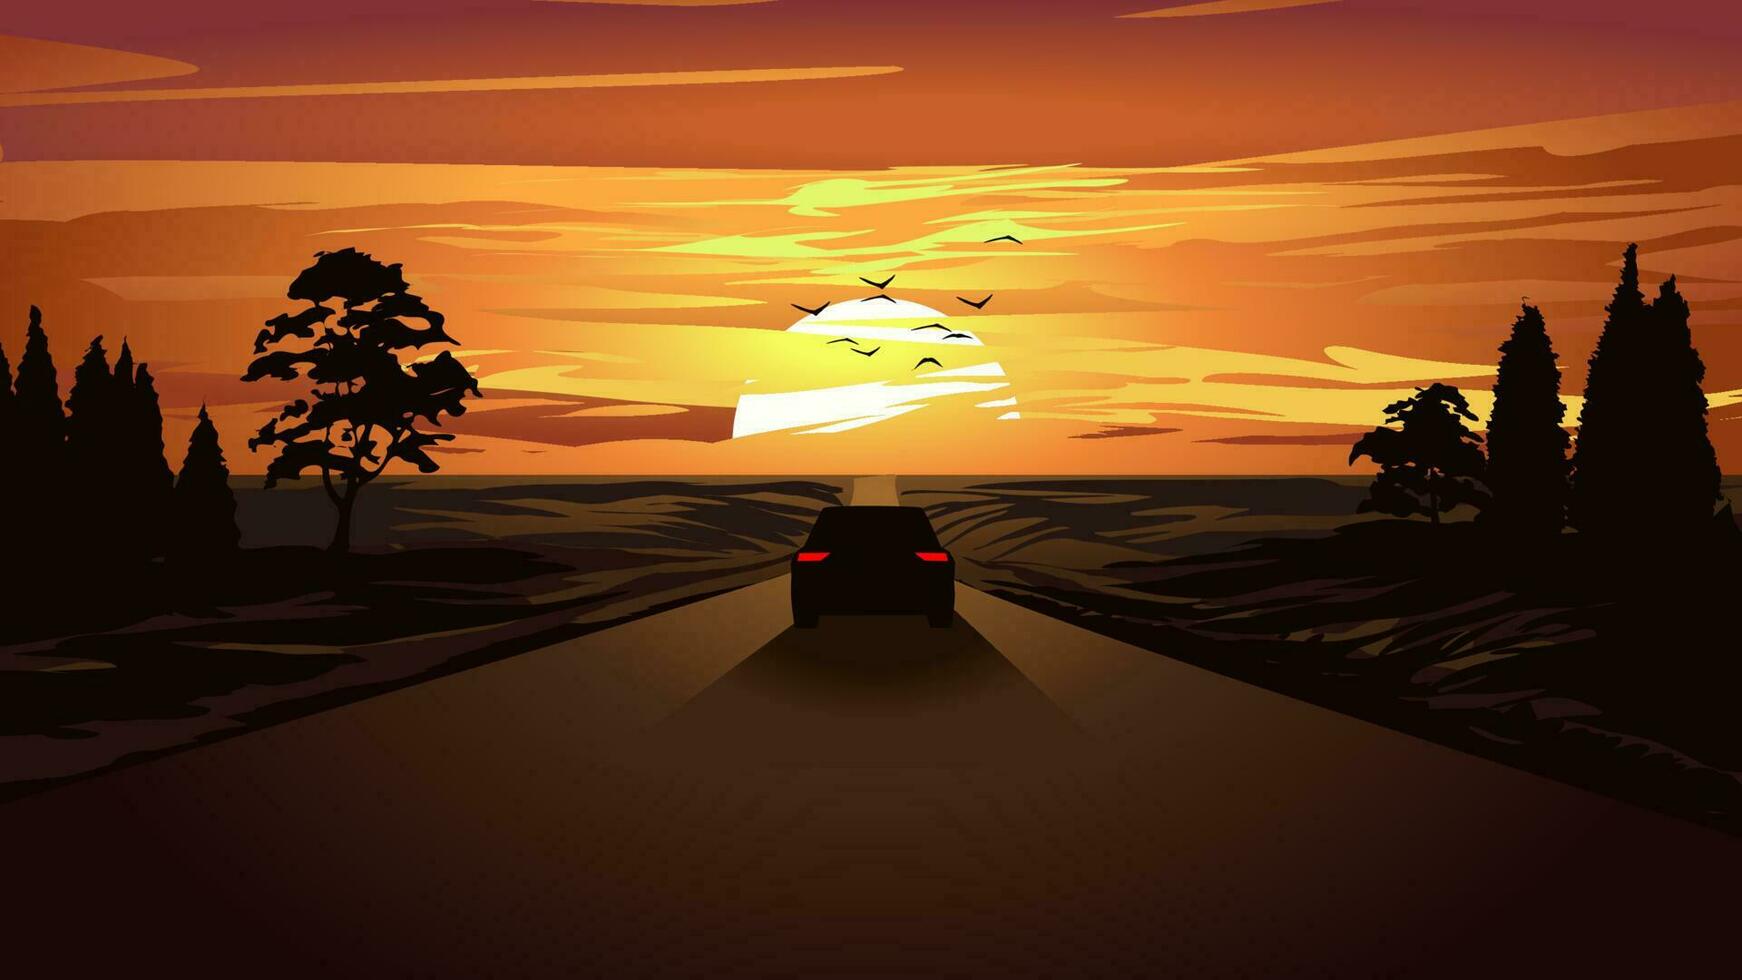 Vector illustration of beautiful sunset wit a car running on strIaight road and trees in silhouette